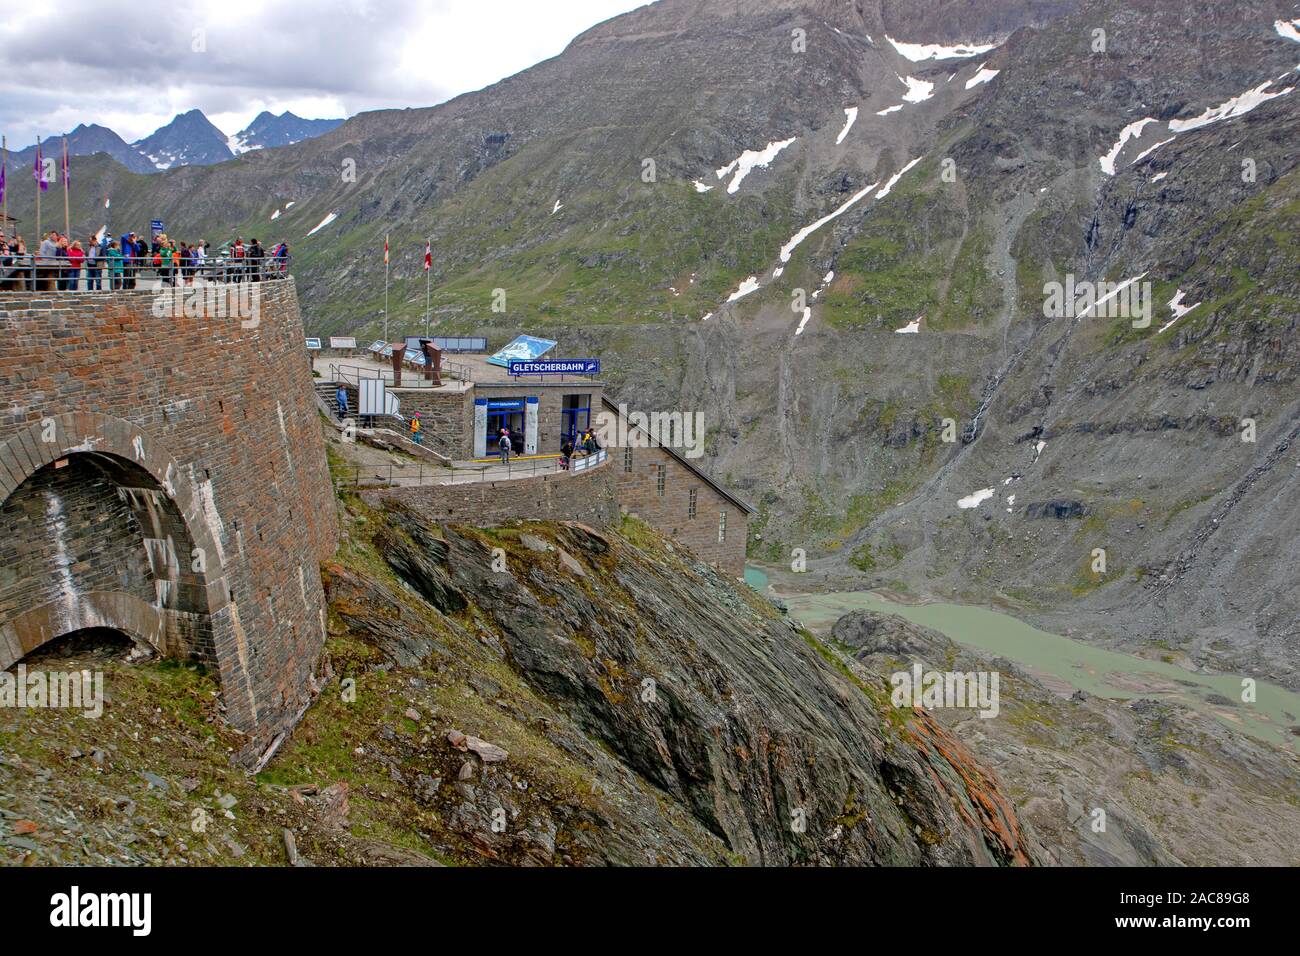 Visitors at the Kaiser-Franz-Josefs-Hohe along the Grossglockner High Alpine Road Stock Photo